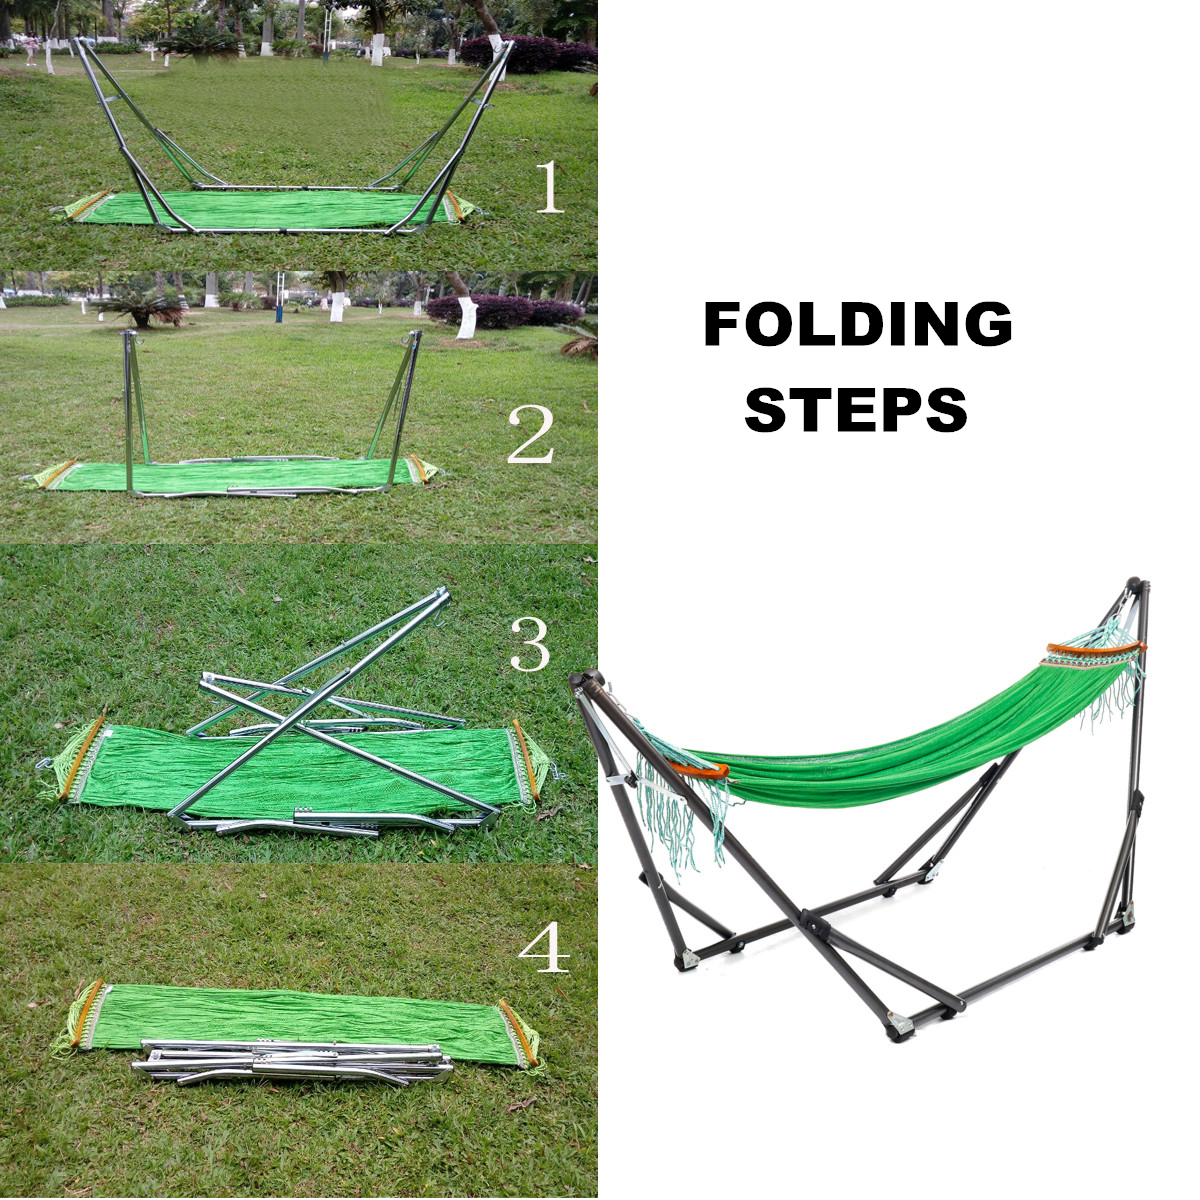 Portable Canvas Hammock Stand Portable Multifunctional Practical Outdoor Garden Swing Hammock Single Hanging Chair Bed Leisure Camping Travel 14